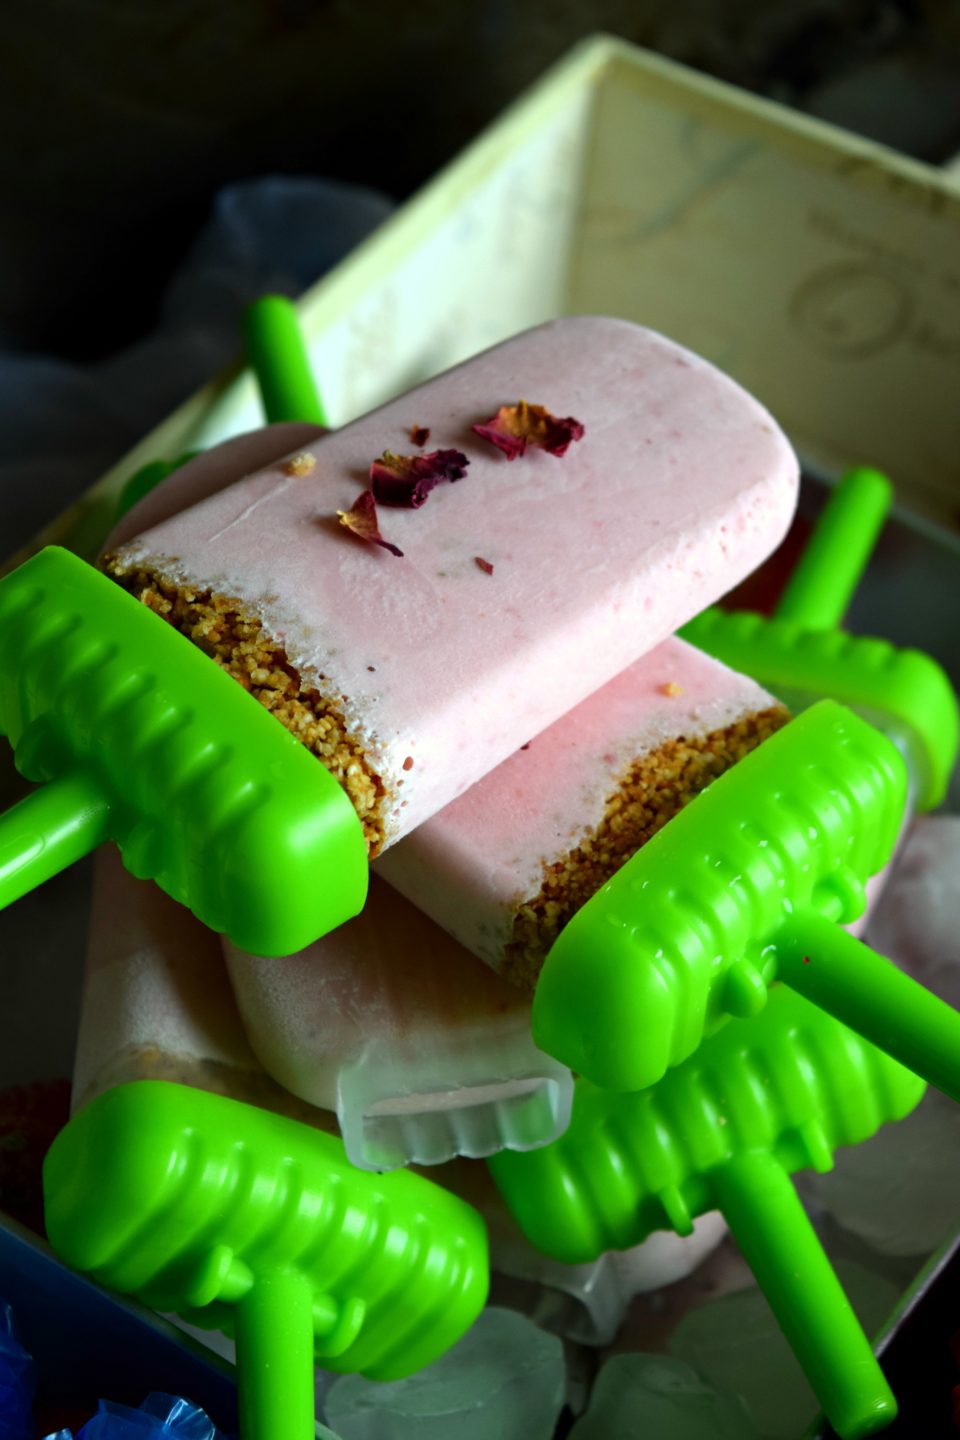 It's a creamy strawberry cheesecake made into a Popsicle with crushed granola base. They taste just like biting into a real cheesecake minus the calories.